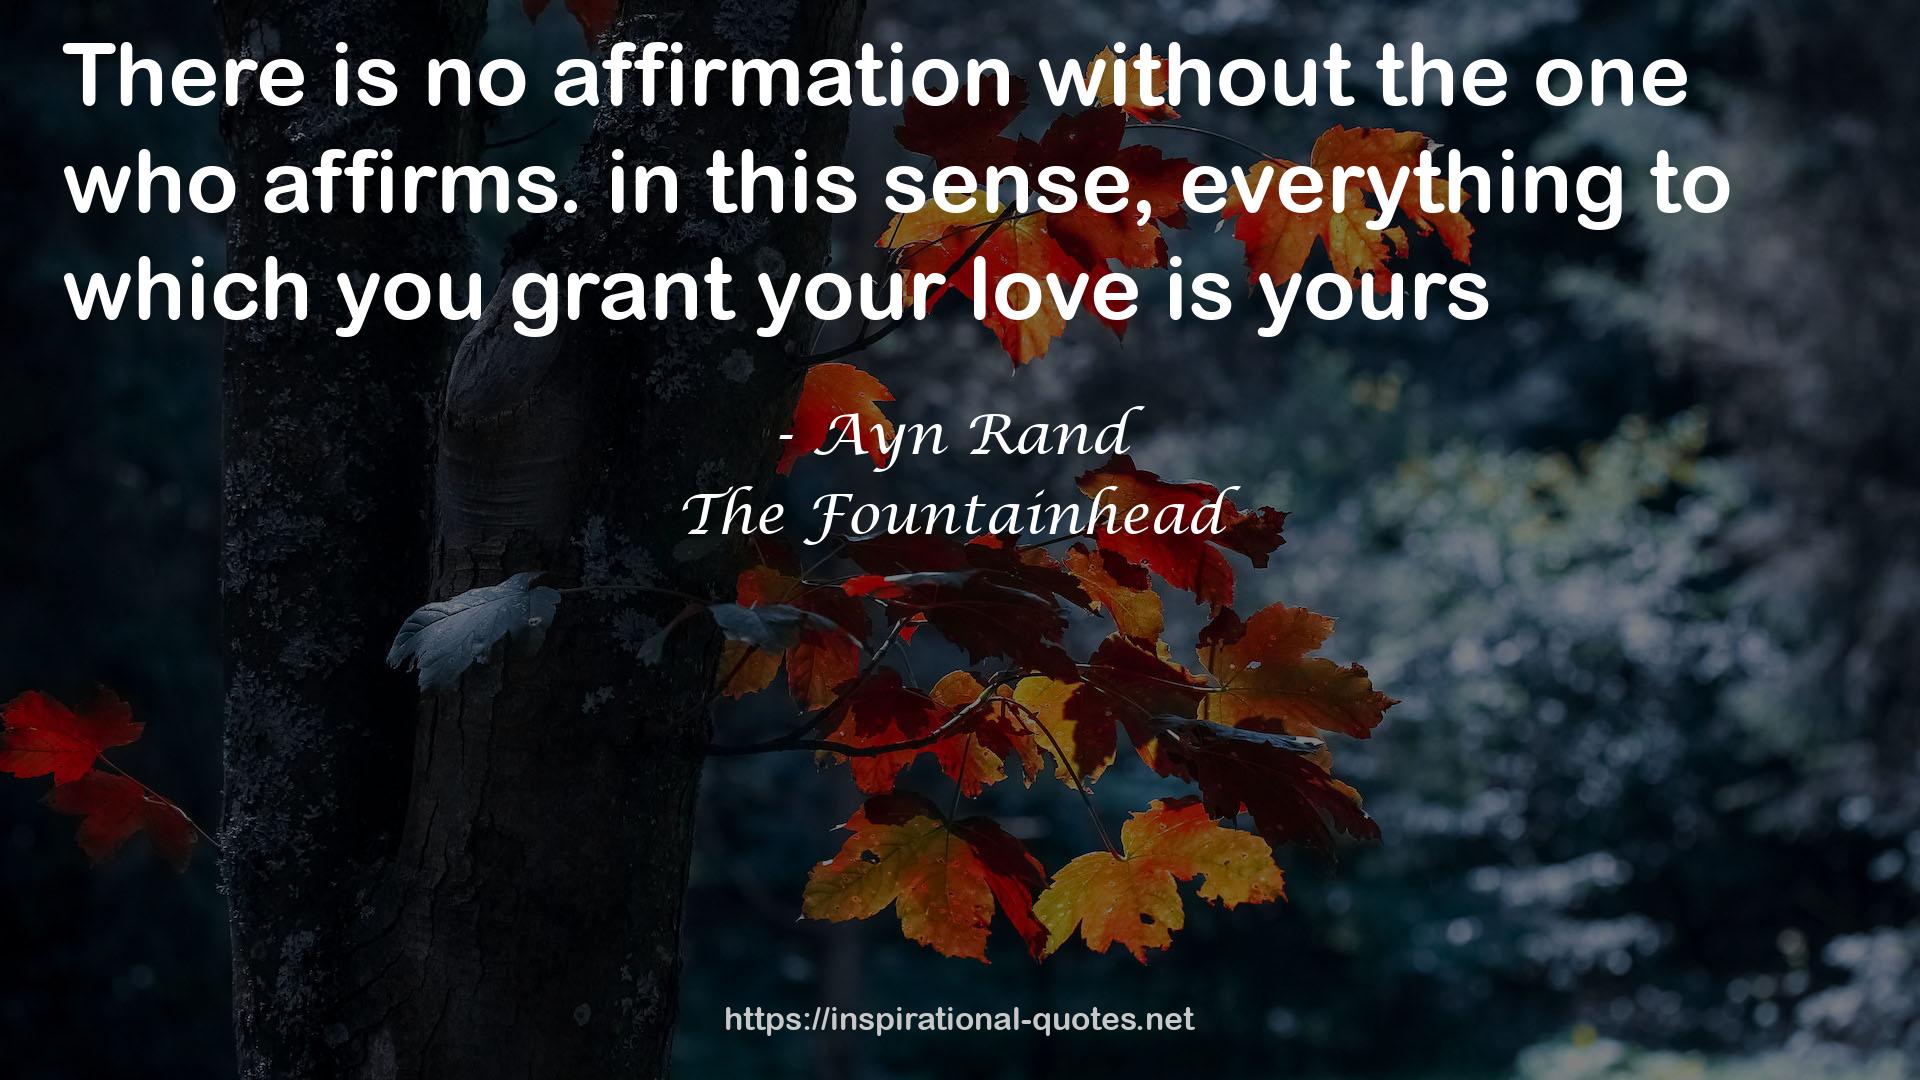 The Fountainhead QUOTES